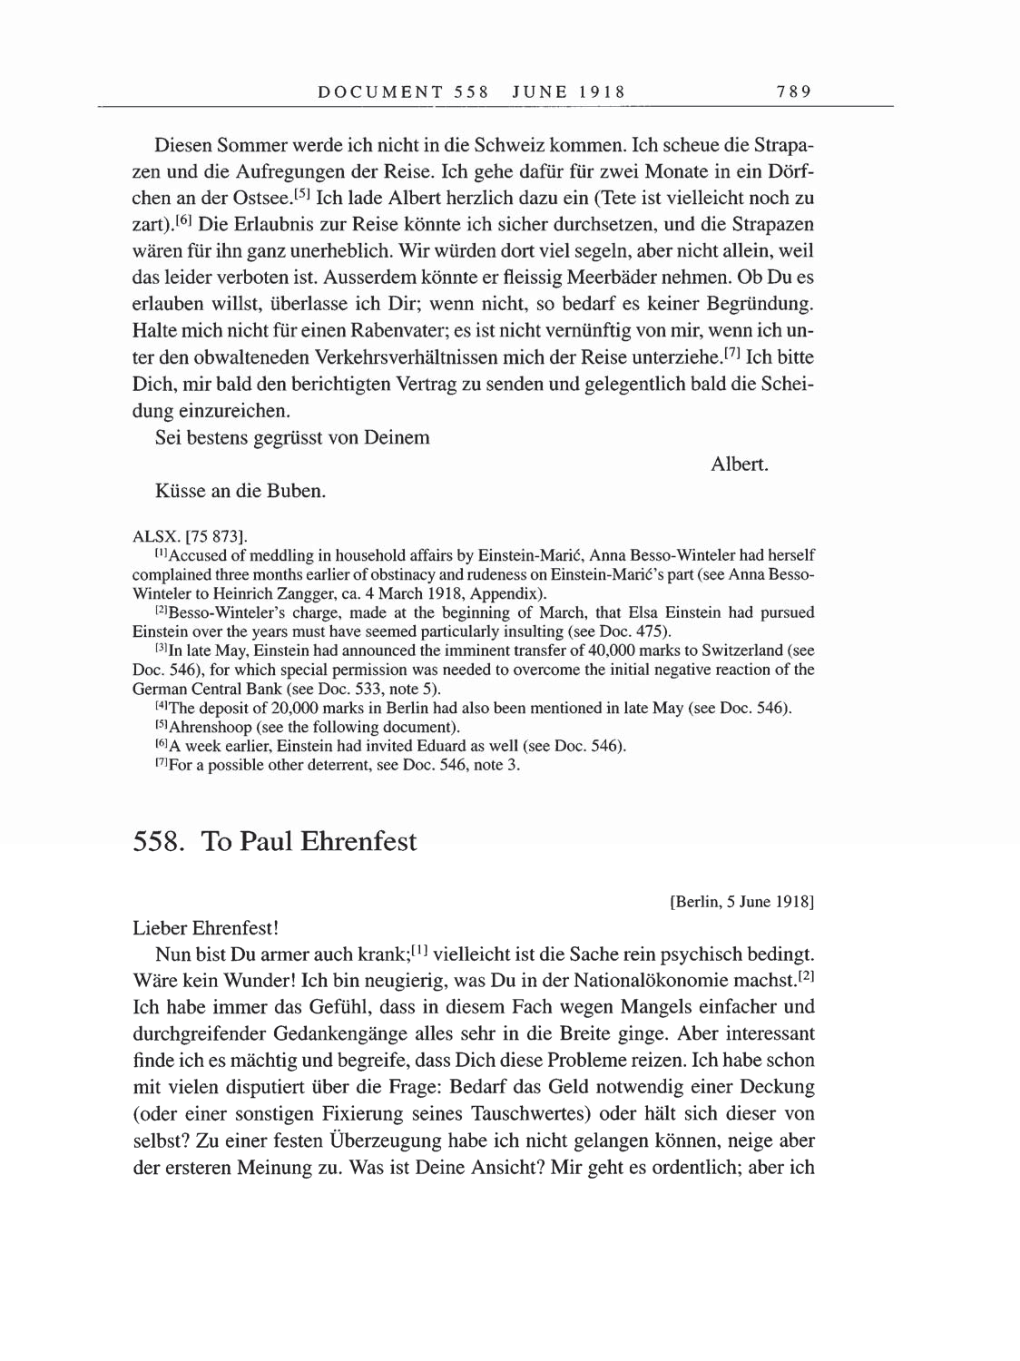 Volume 8, Part B: The Berlin Years: Correspondence 1918 page 789